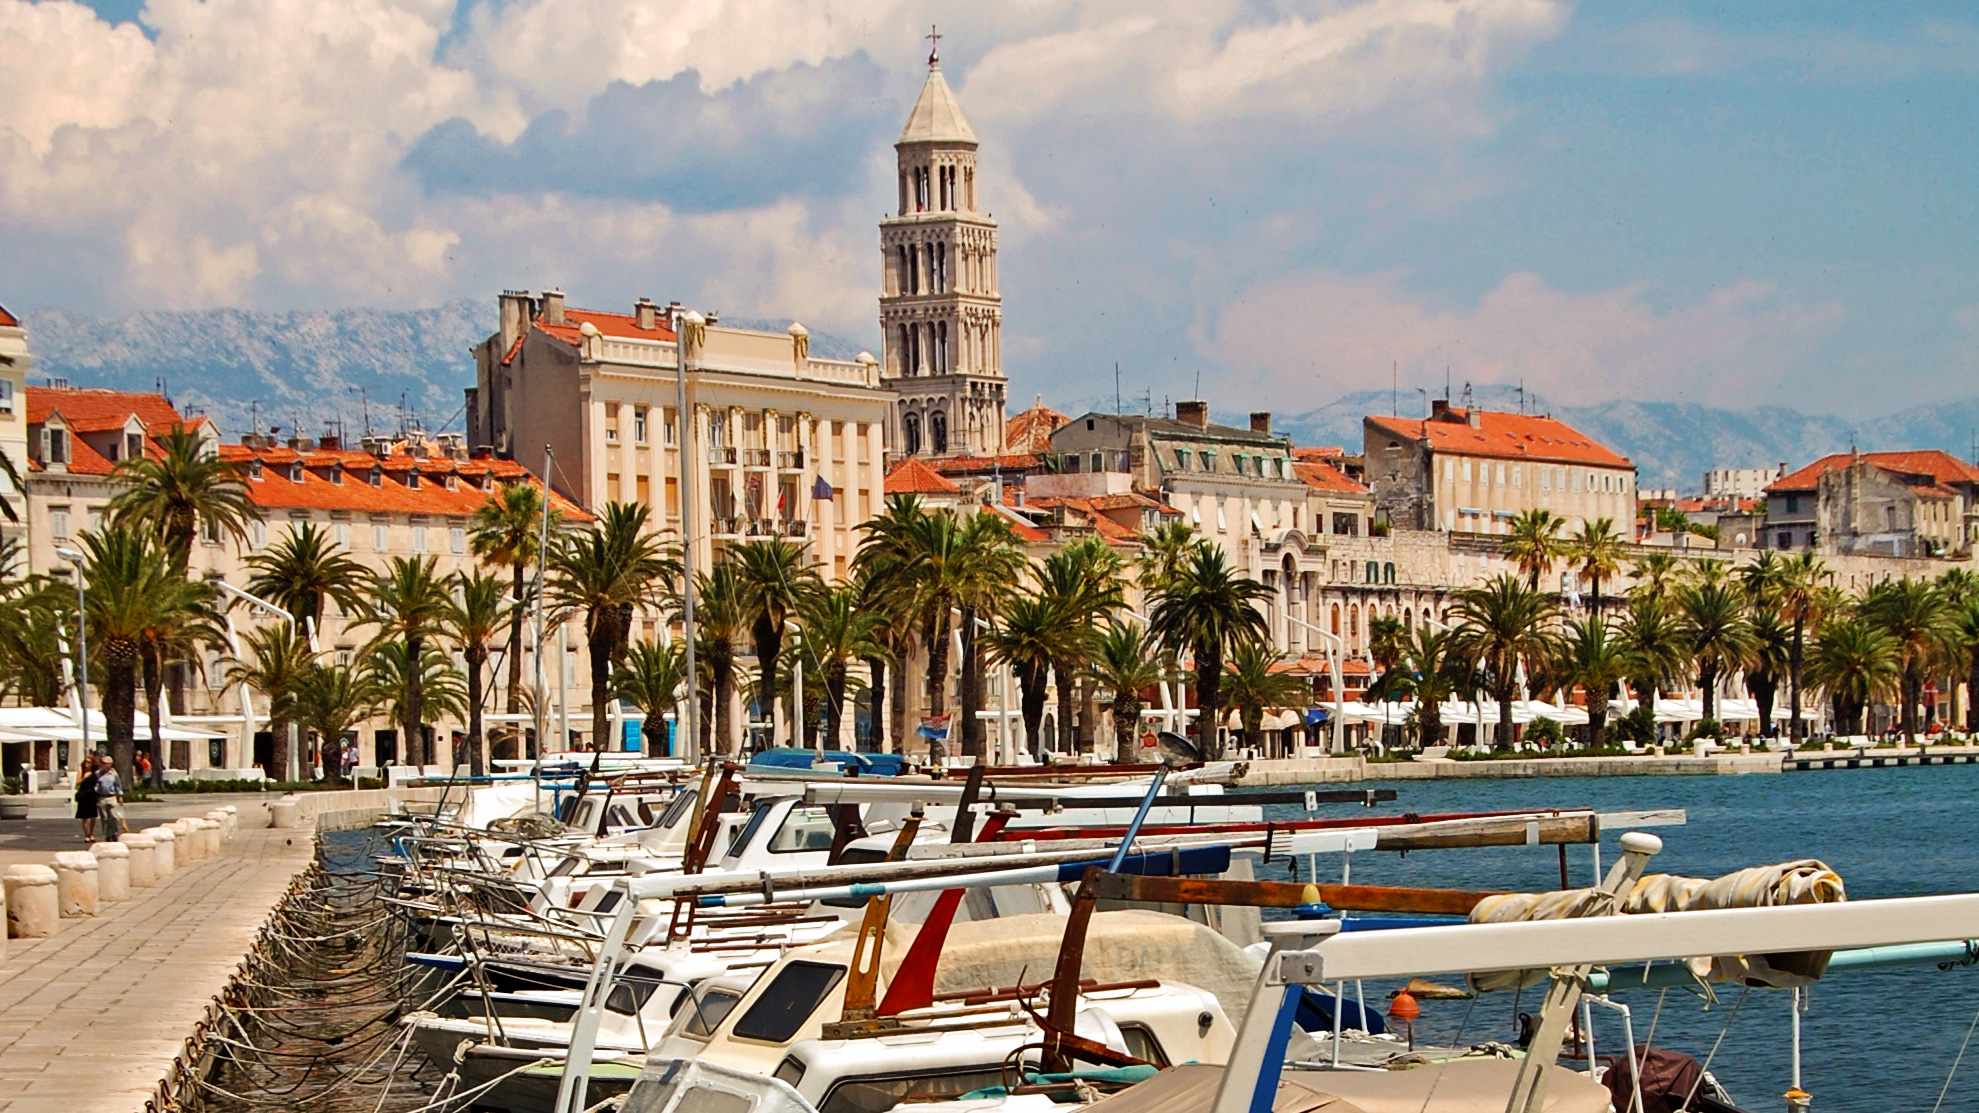 Split - Sightseeing, Accommodation, Day Trips, Eating Out - Visit